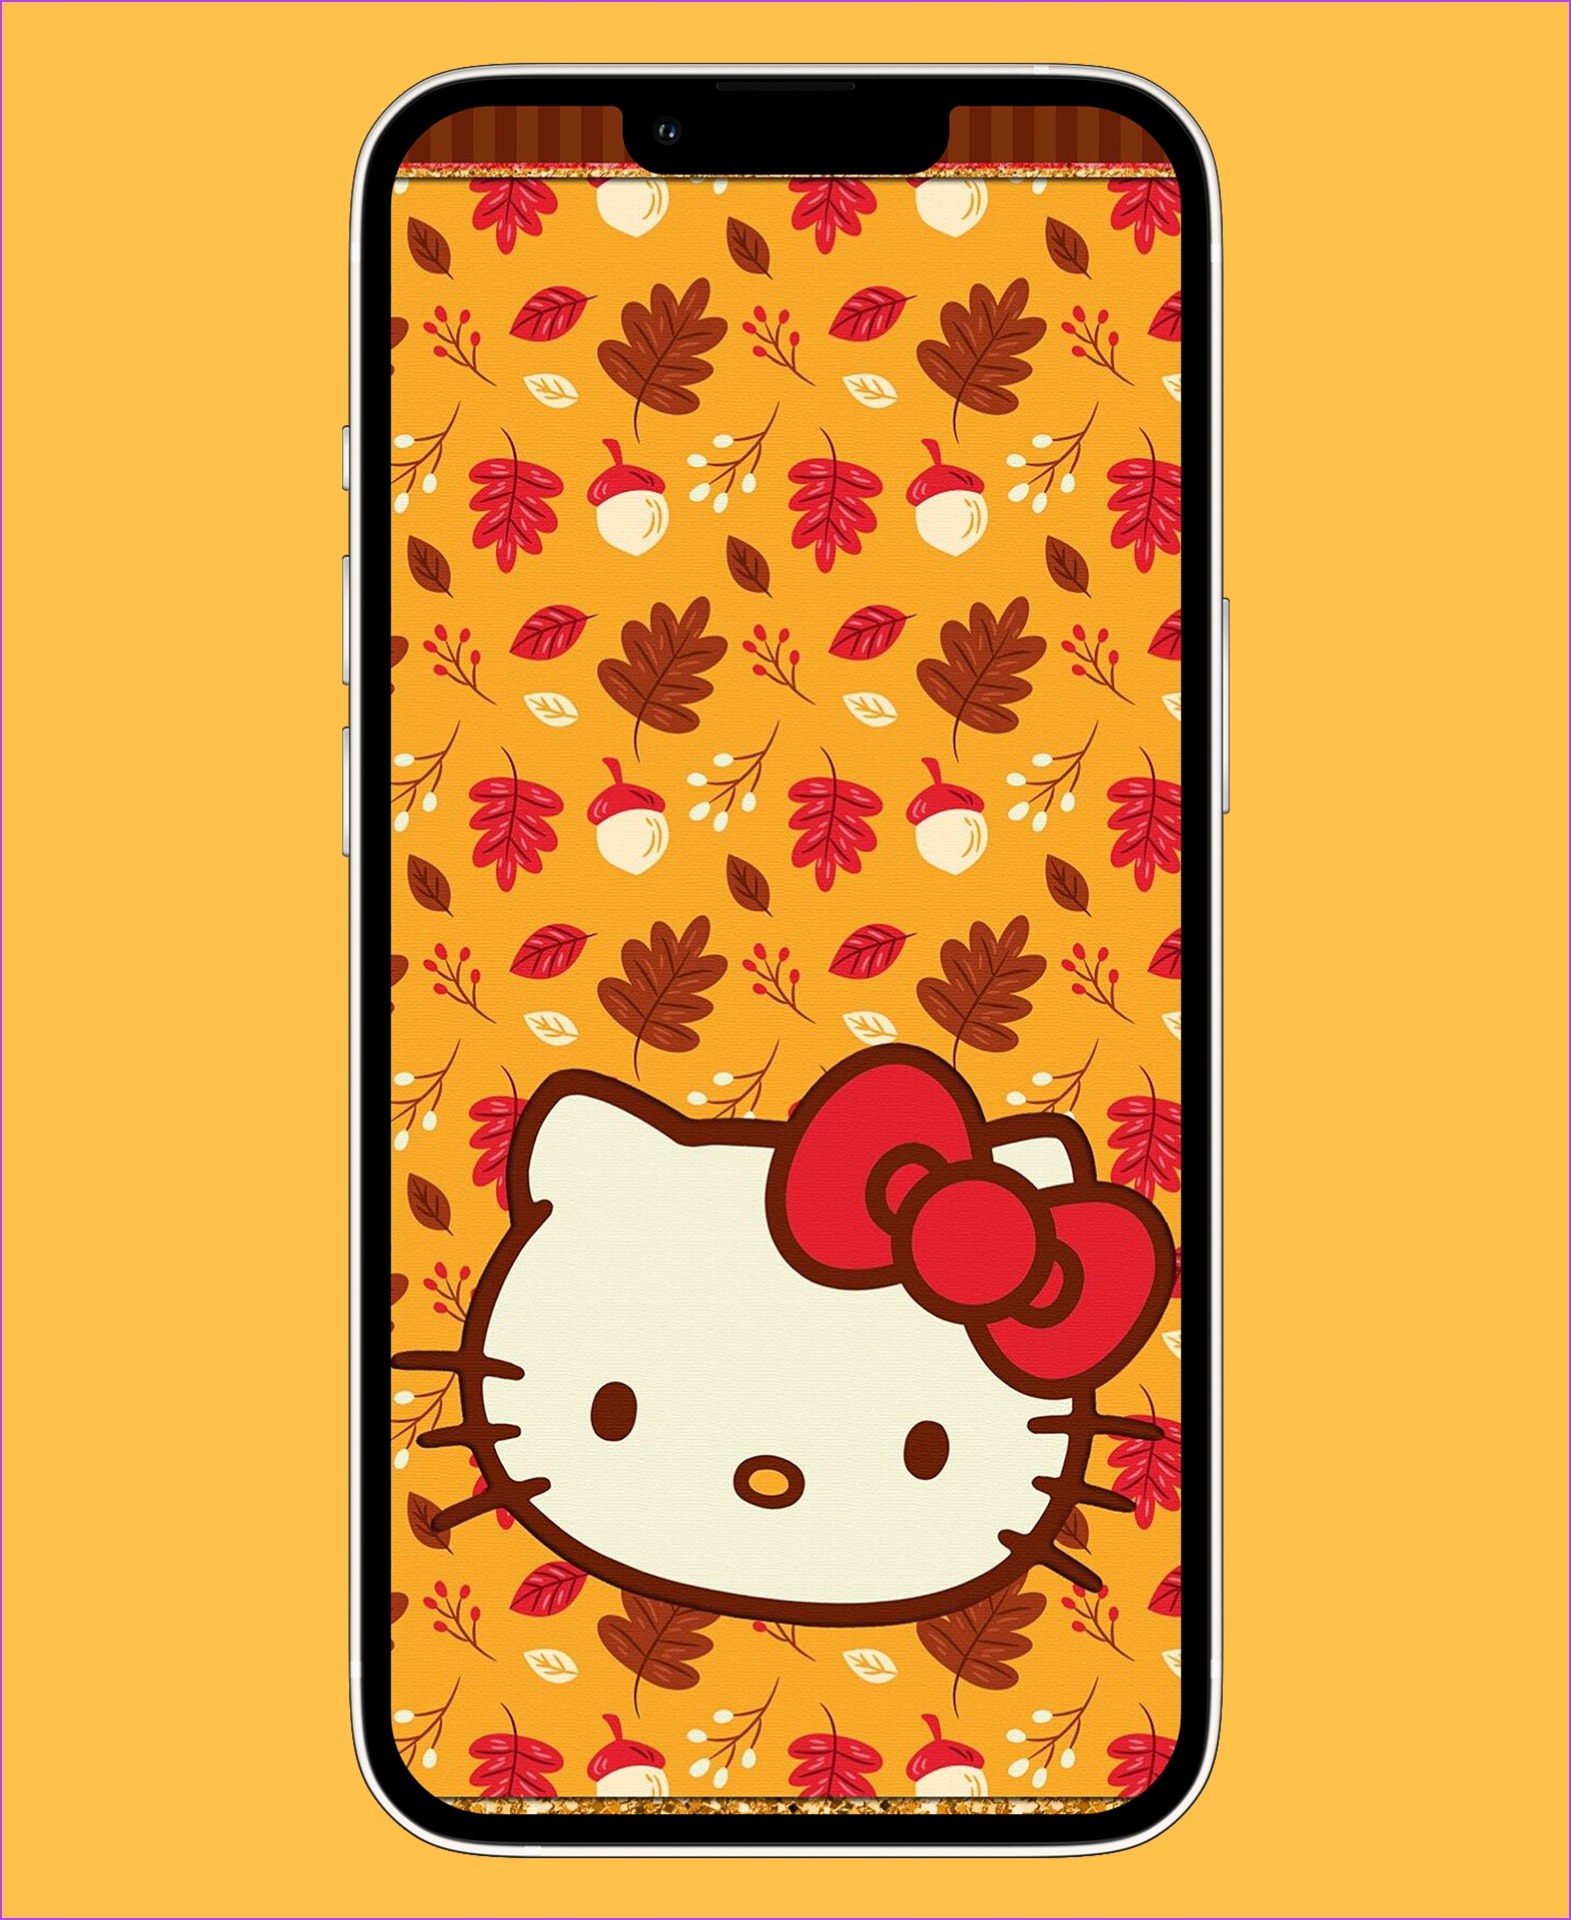 14 Cute Thanksgiving iPhone Wallpapers for Free - Guiding Tech